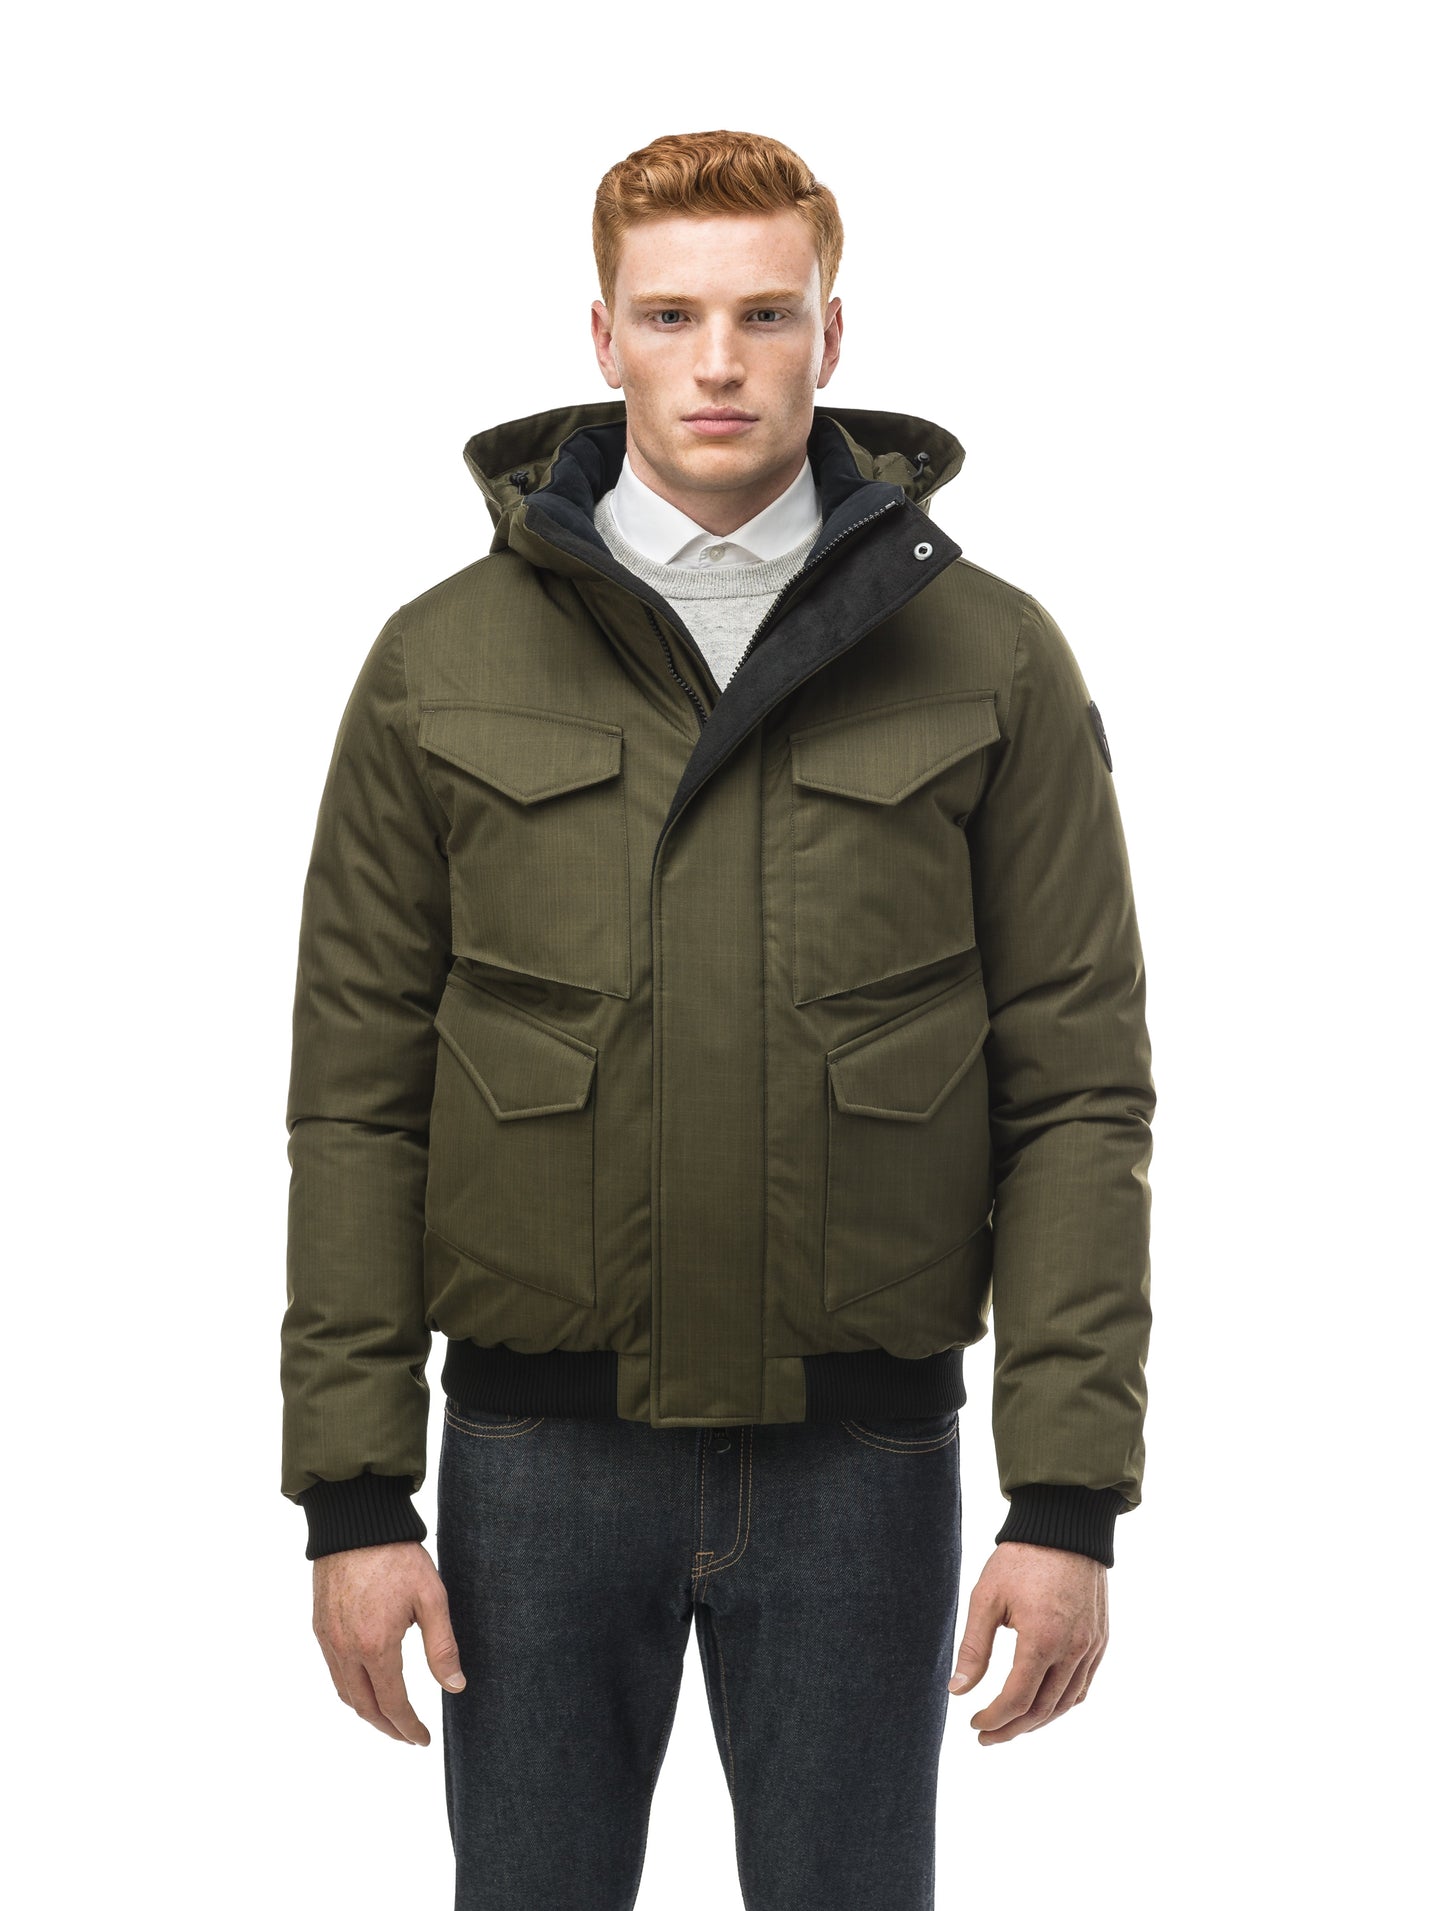 Men's sleek down filled bomber jacket with clean details and a fur free hood in CH Fatigue